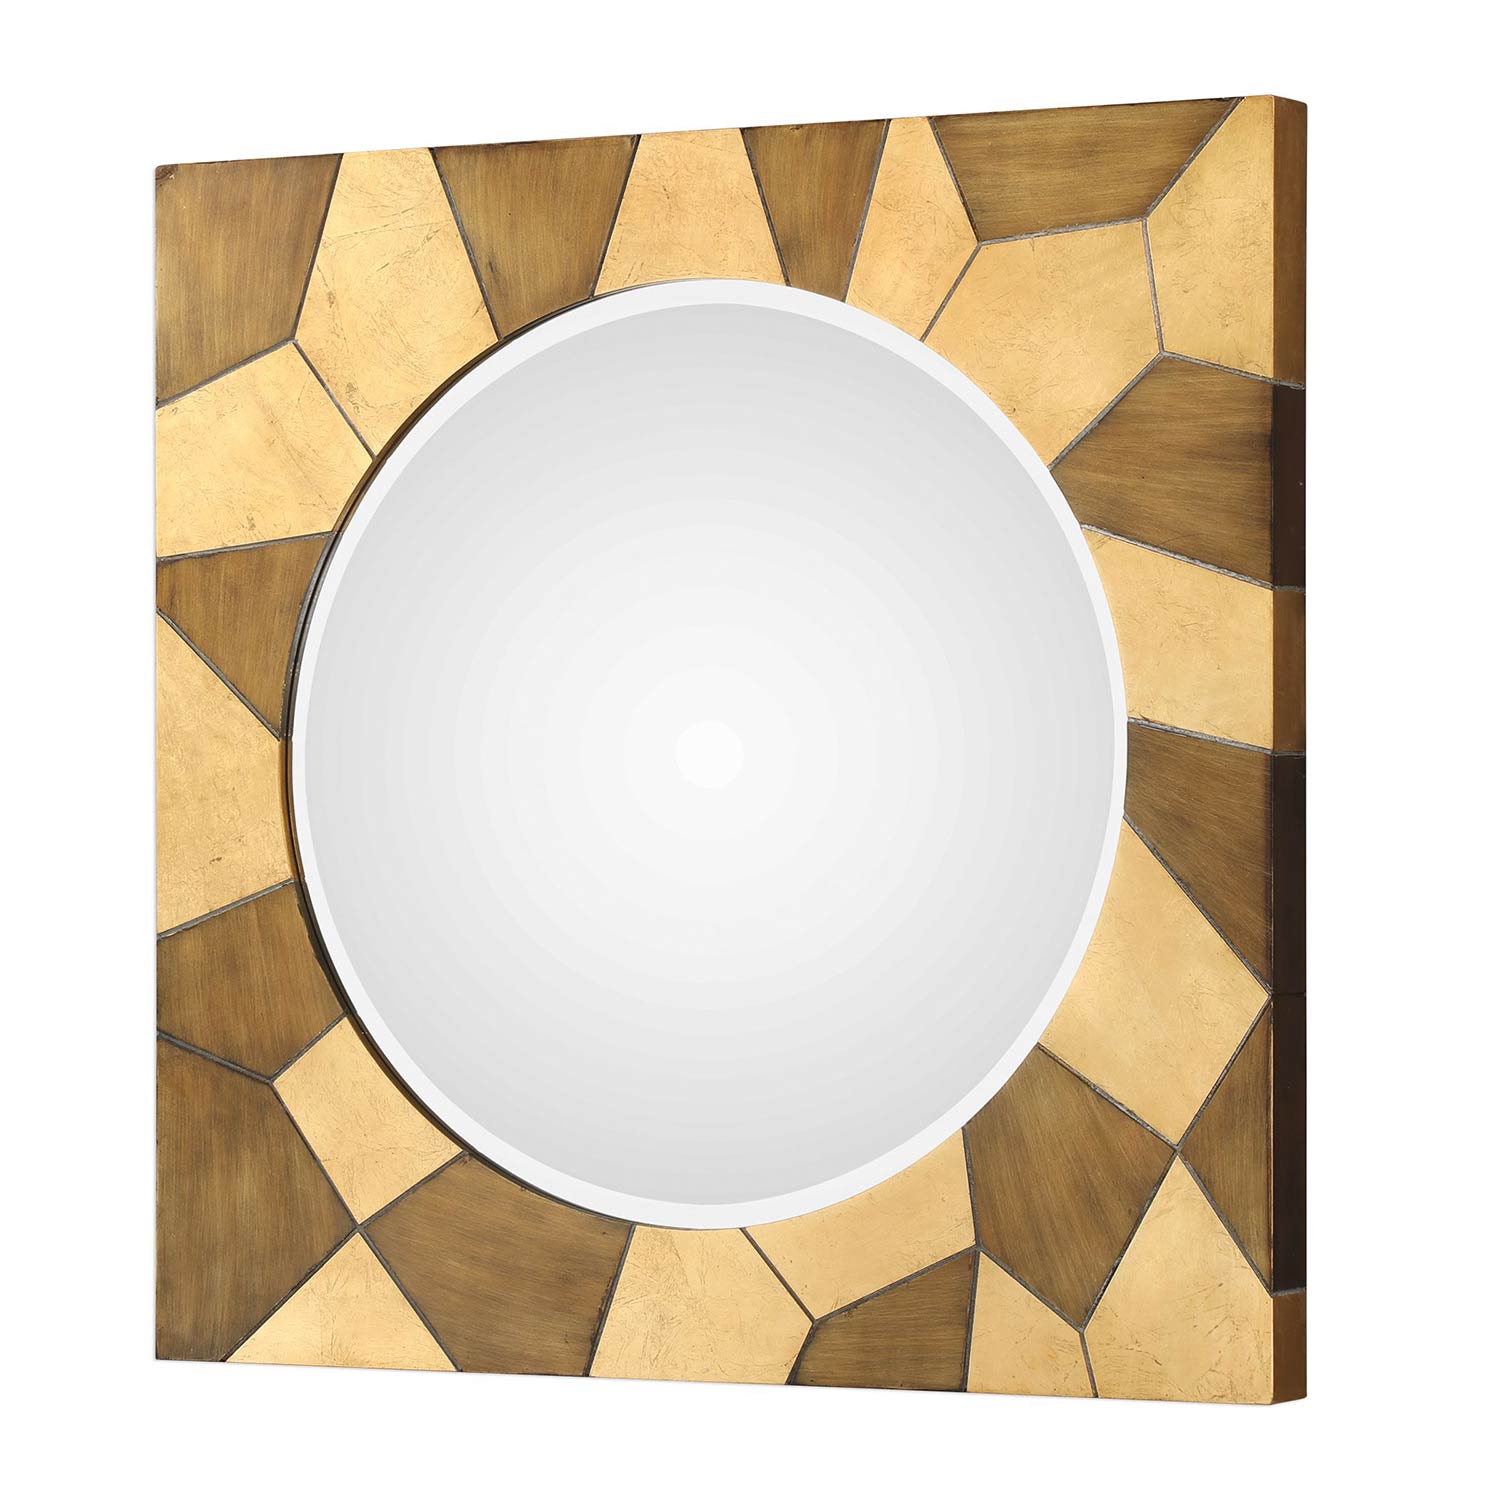 Uttermost Ussana Patterned Wood Mirror